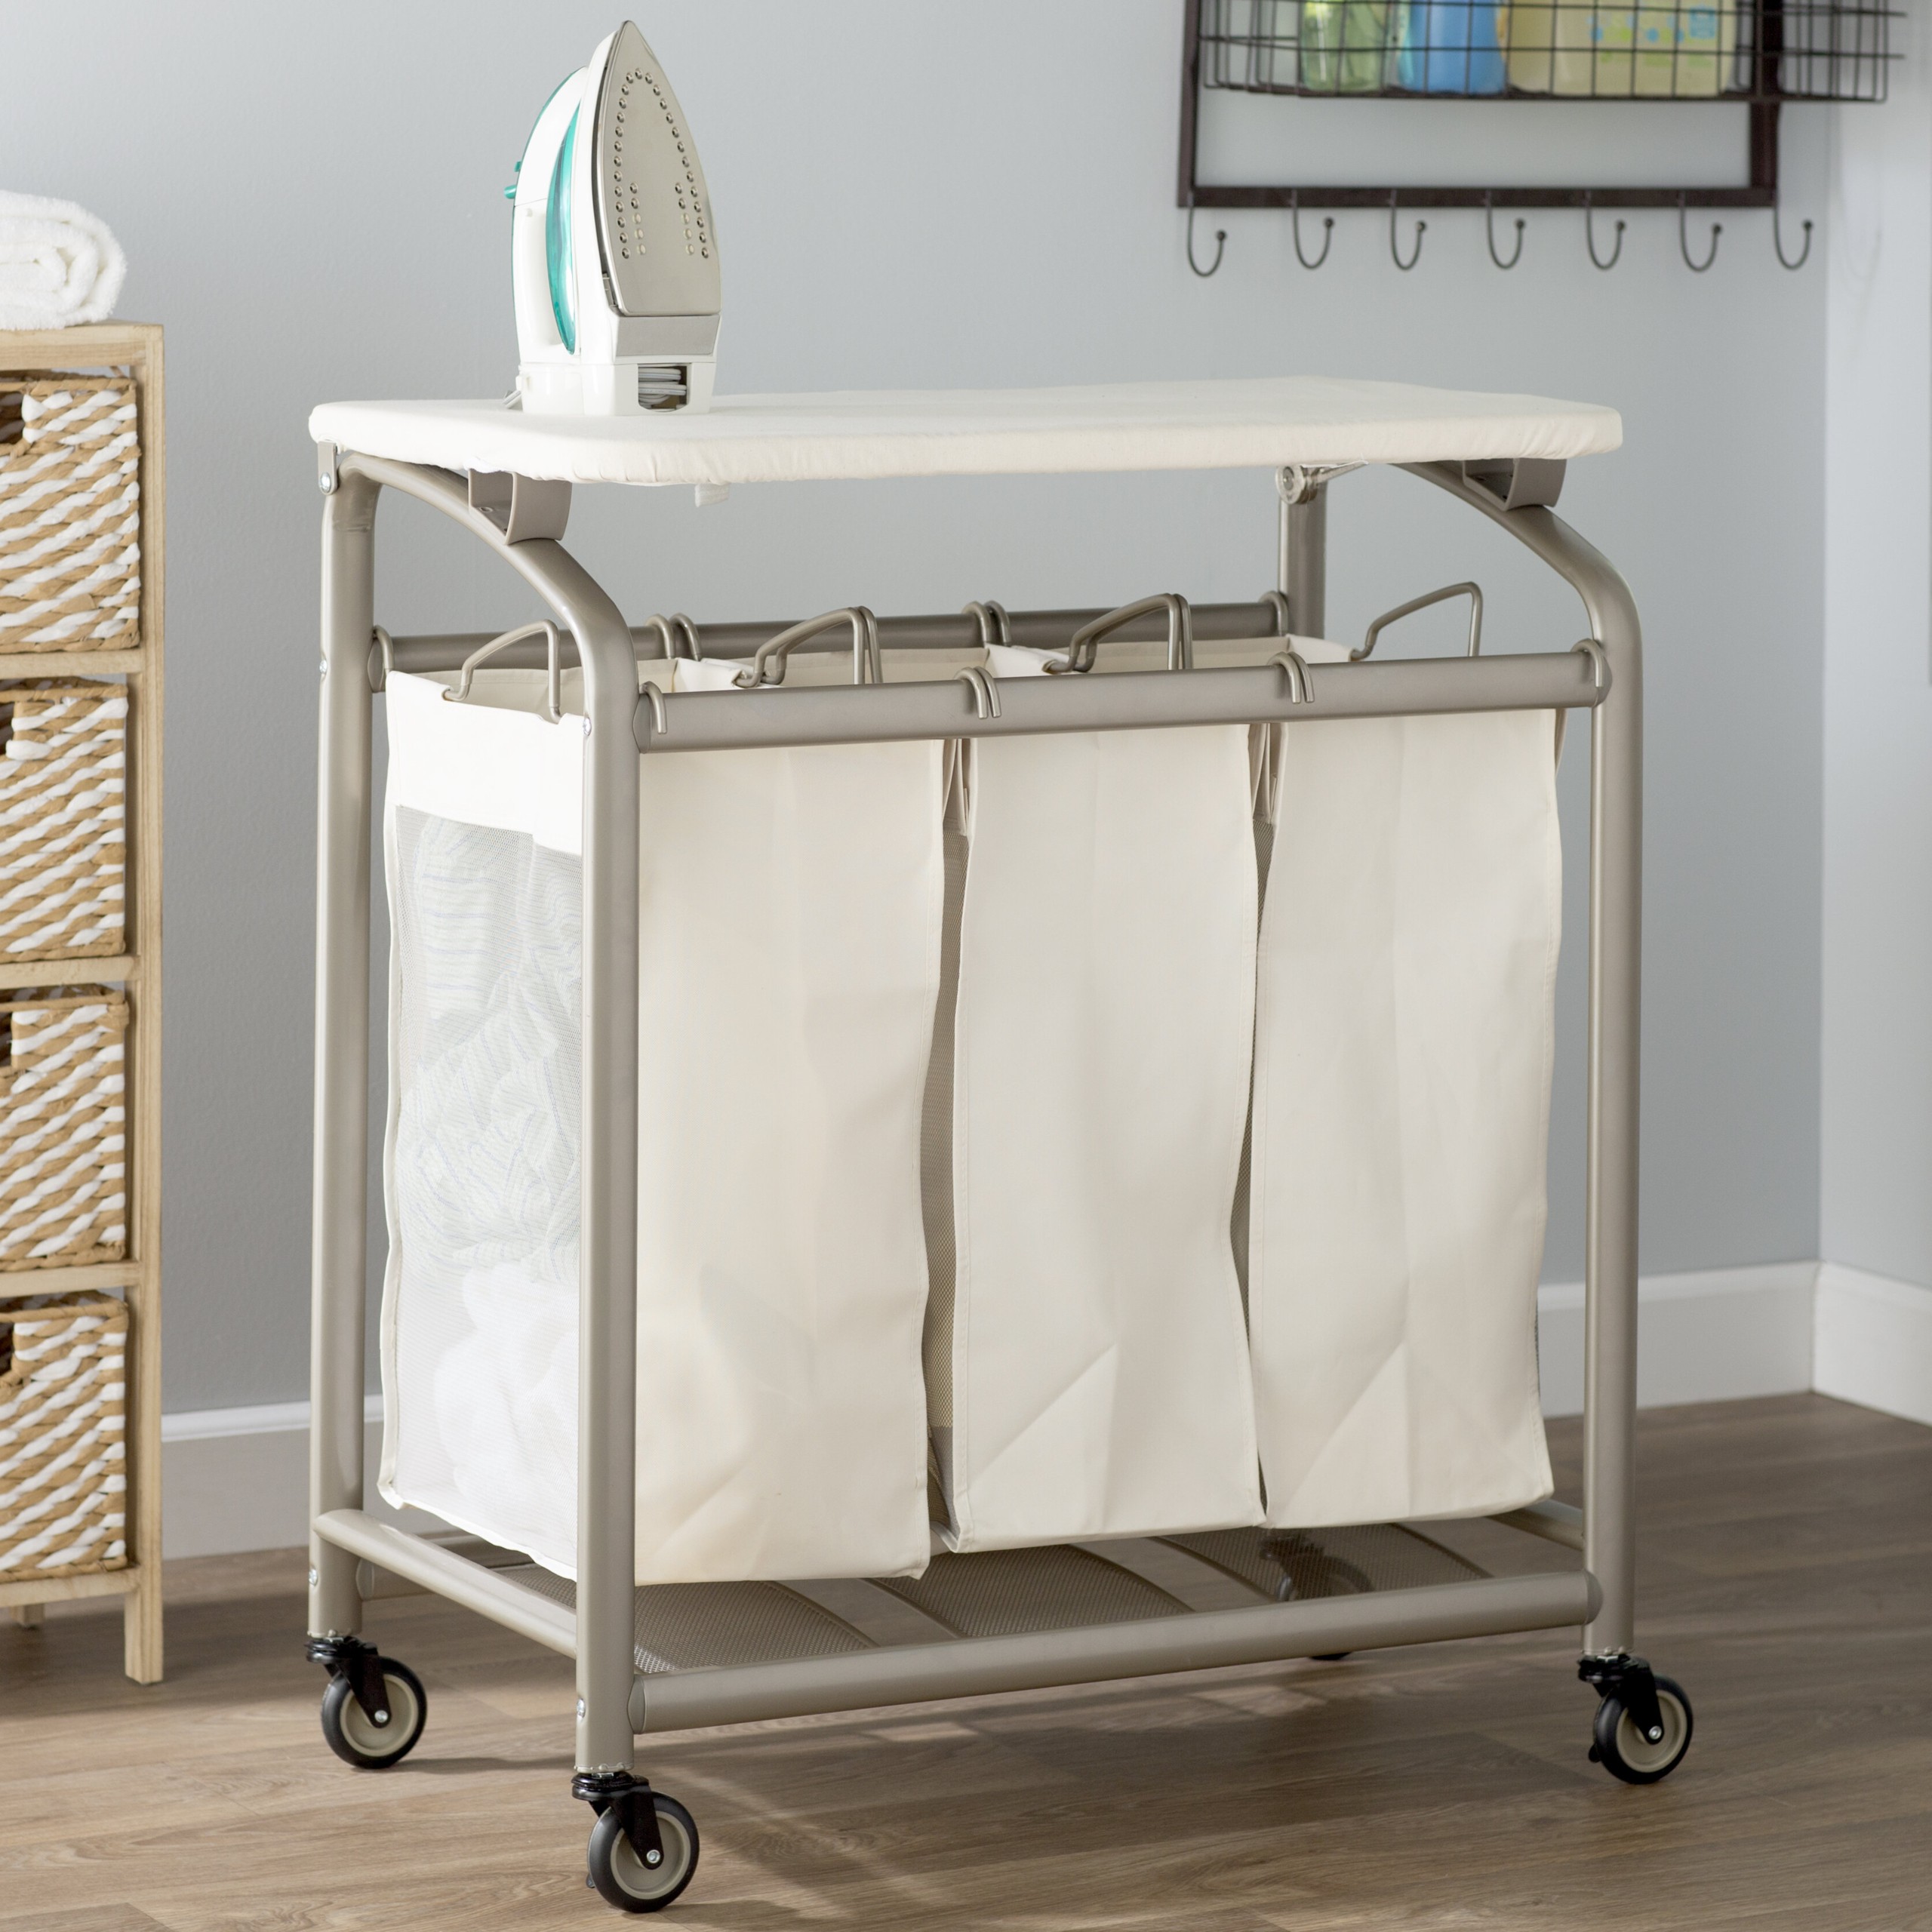 Laundry Sorter Hamper with Folding Table